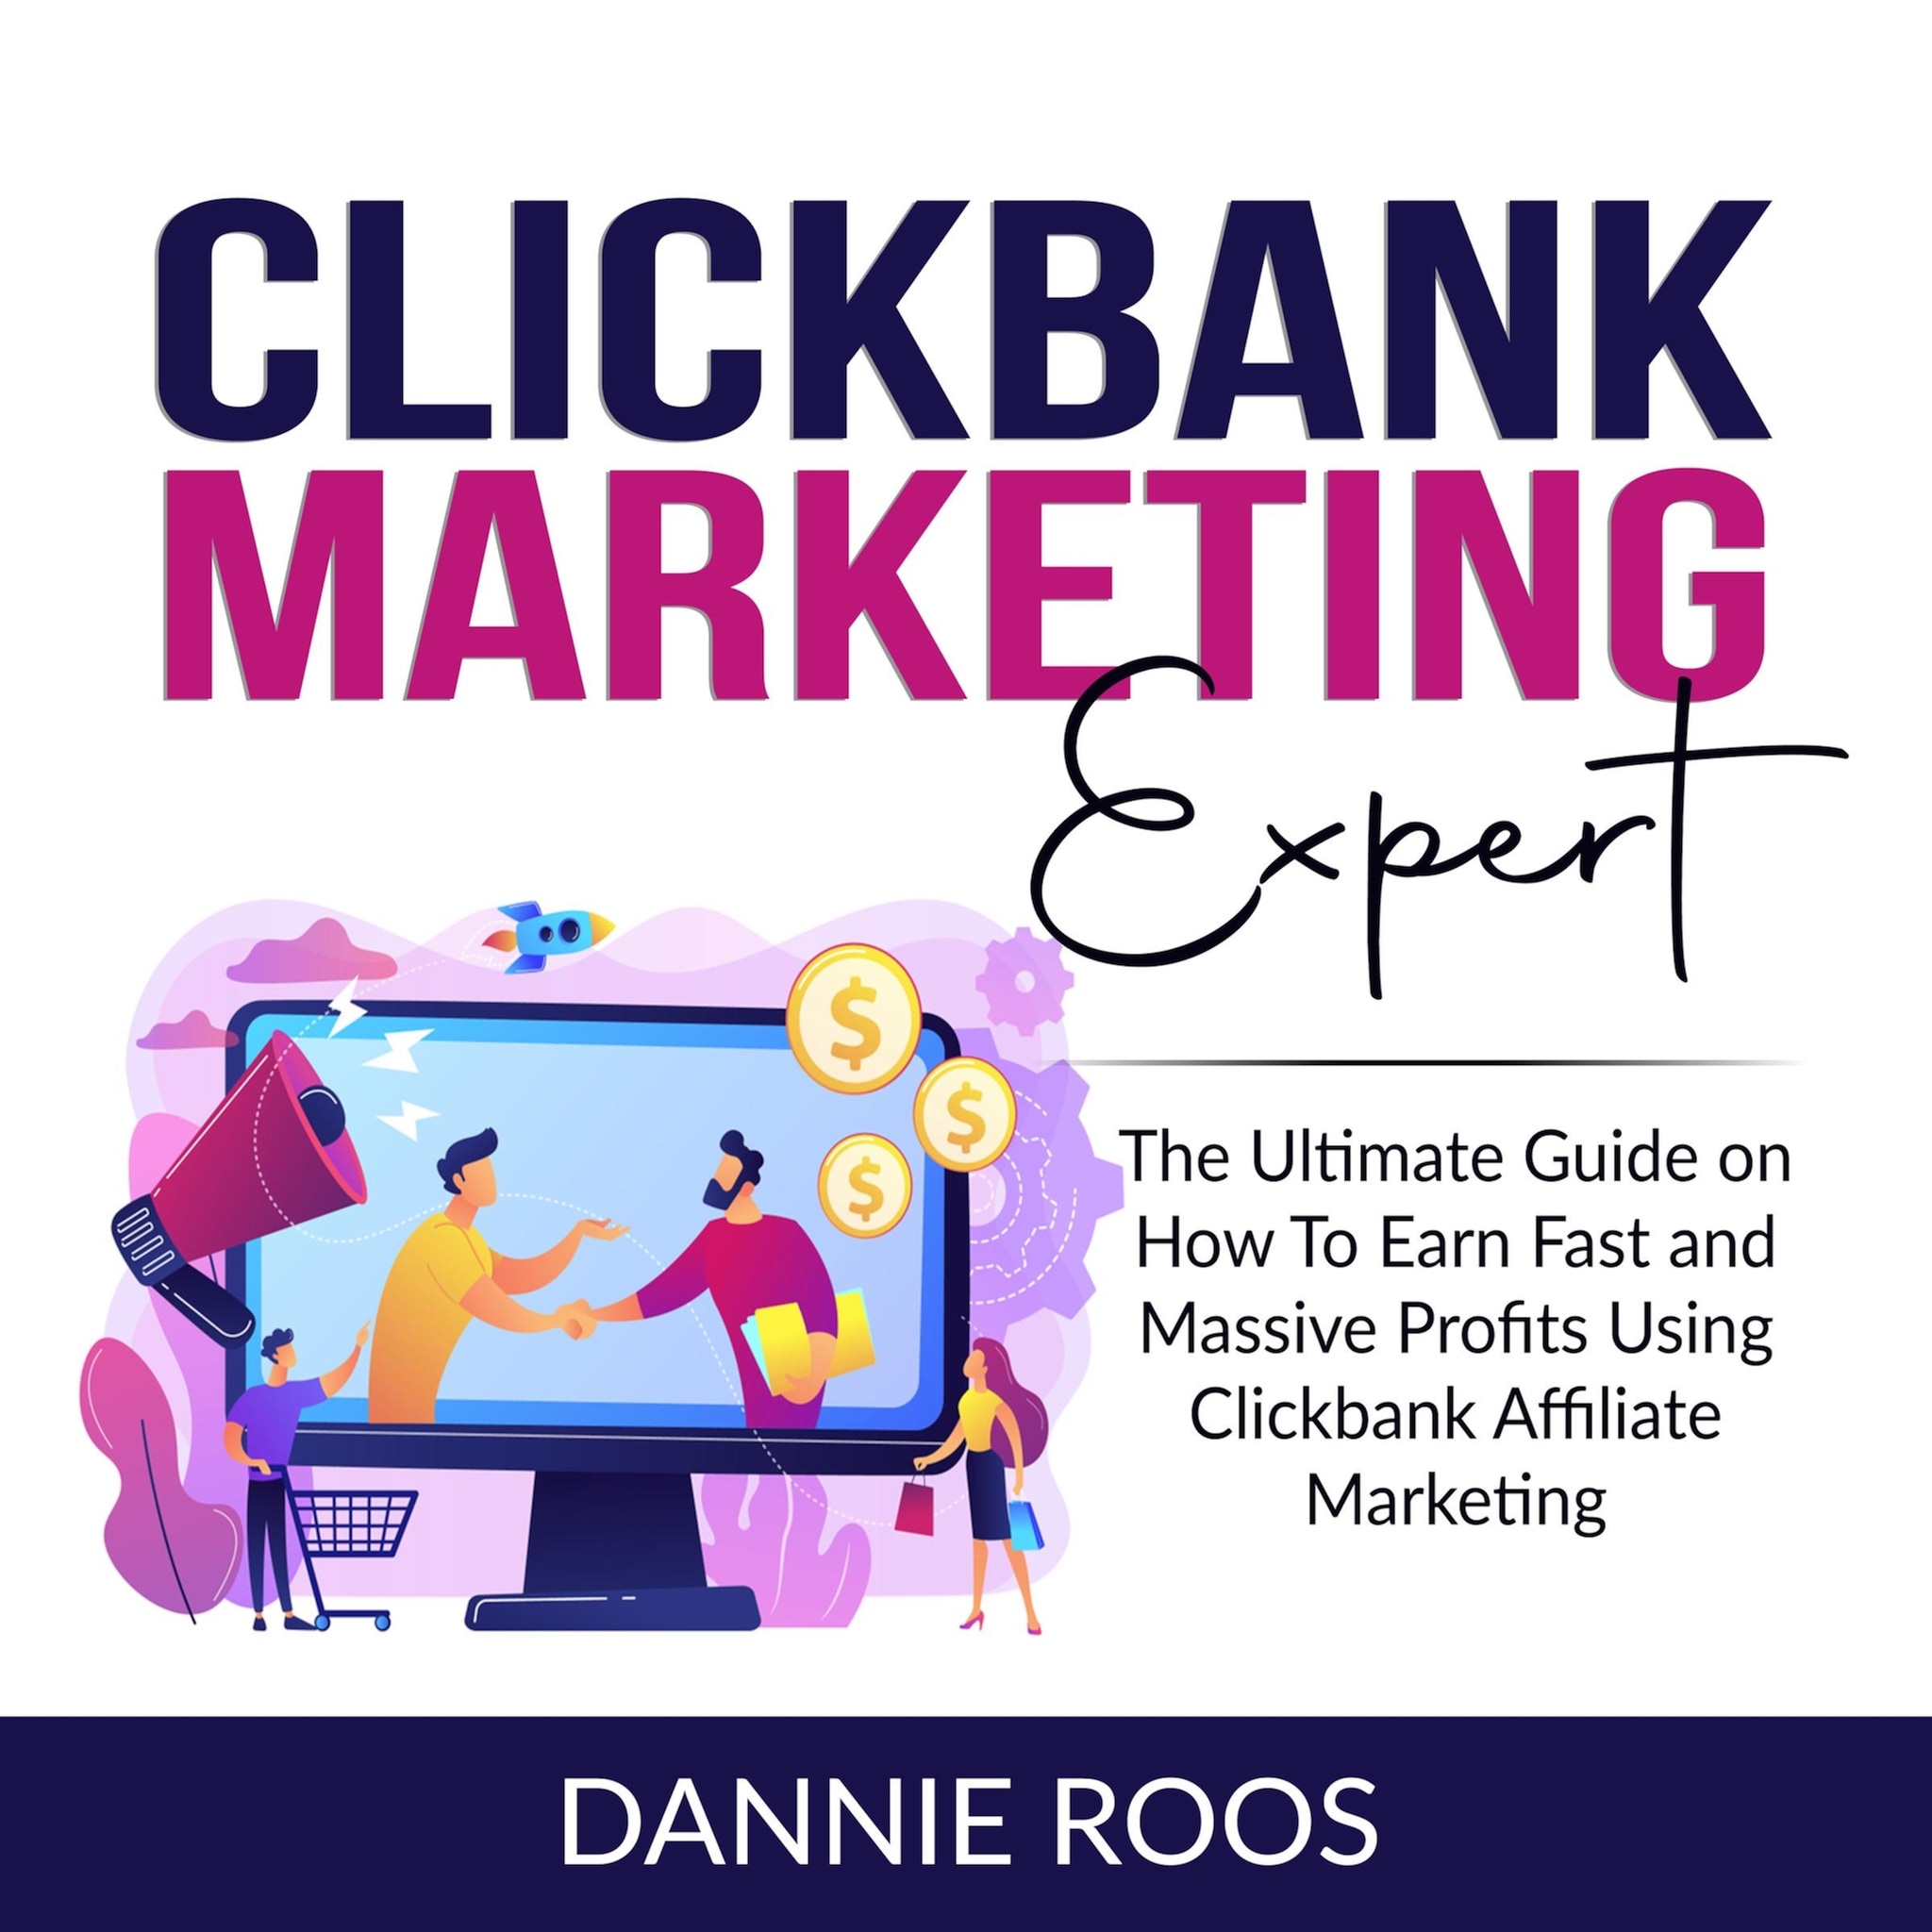 ClickBank Marketing Expert: The Ultimate Guide on How To Earn Fast and Massive Profits Using Clickbank Affiliate Marketing ilmaiseksi